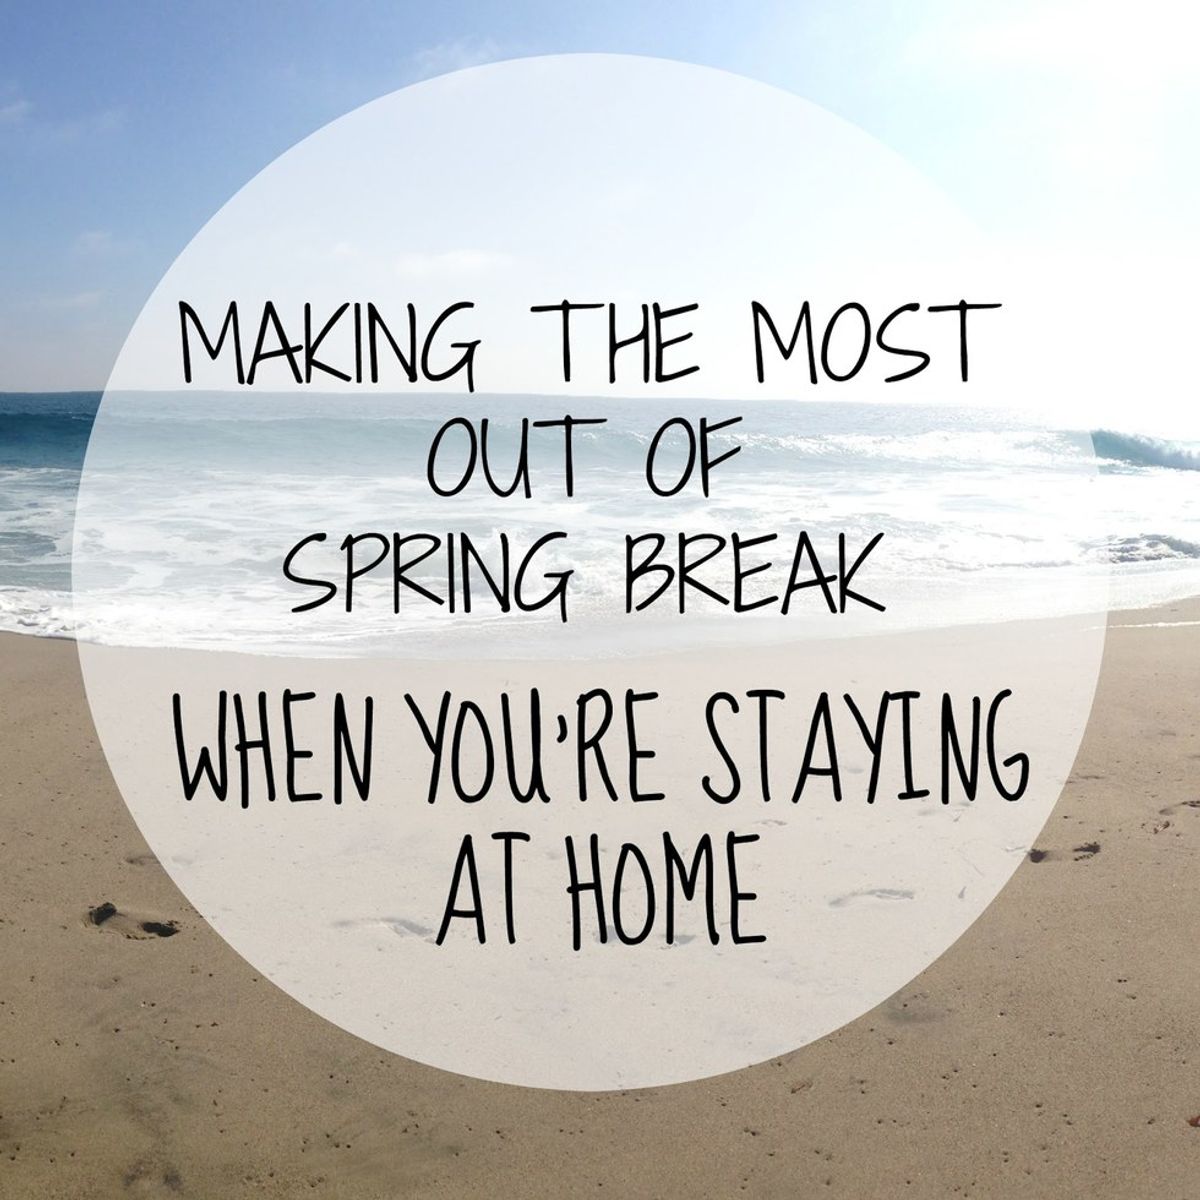 4 Things To Do If You're Staying Home Over Spring Break